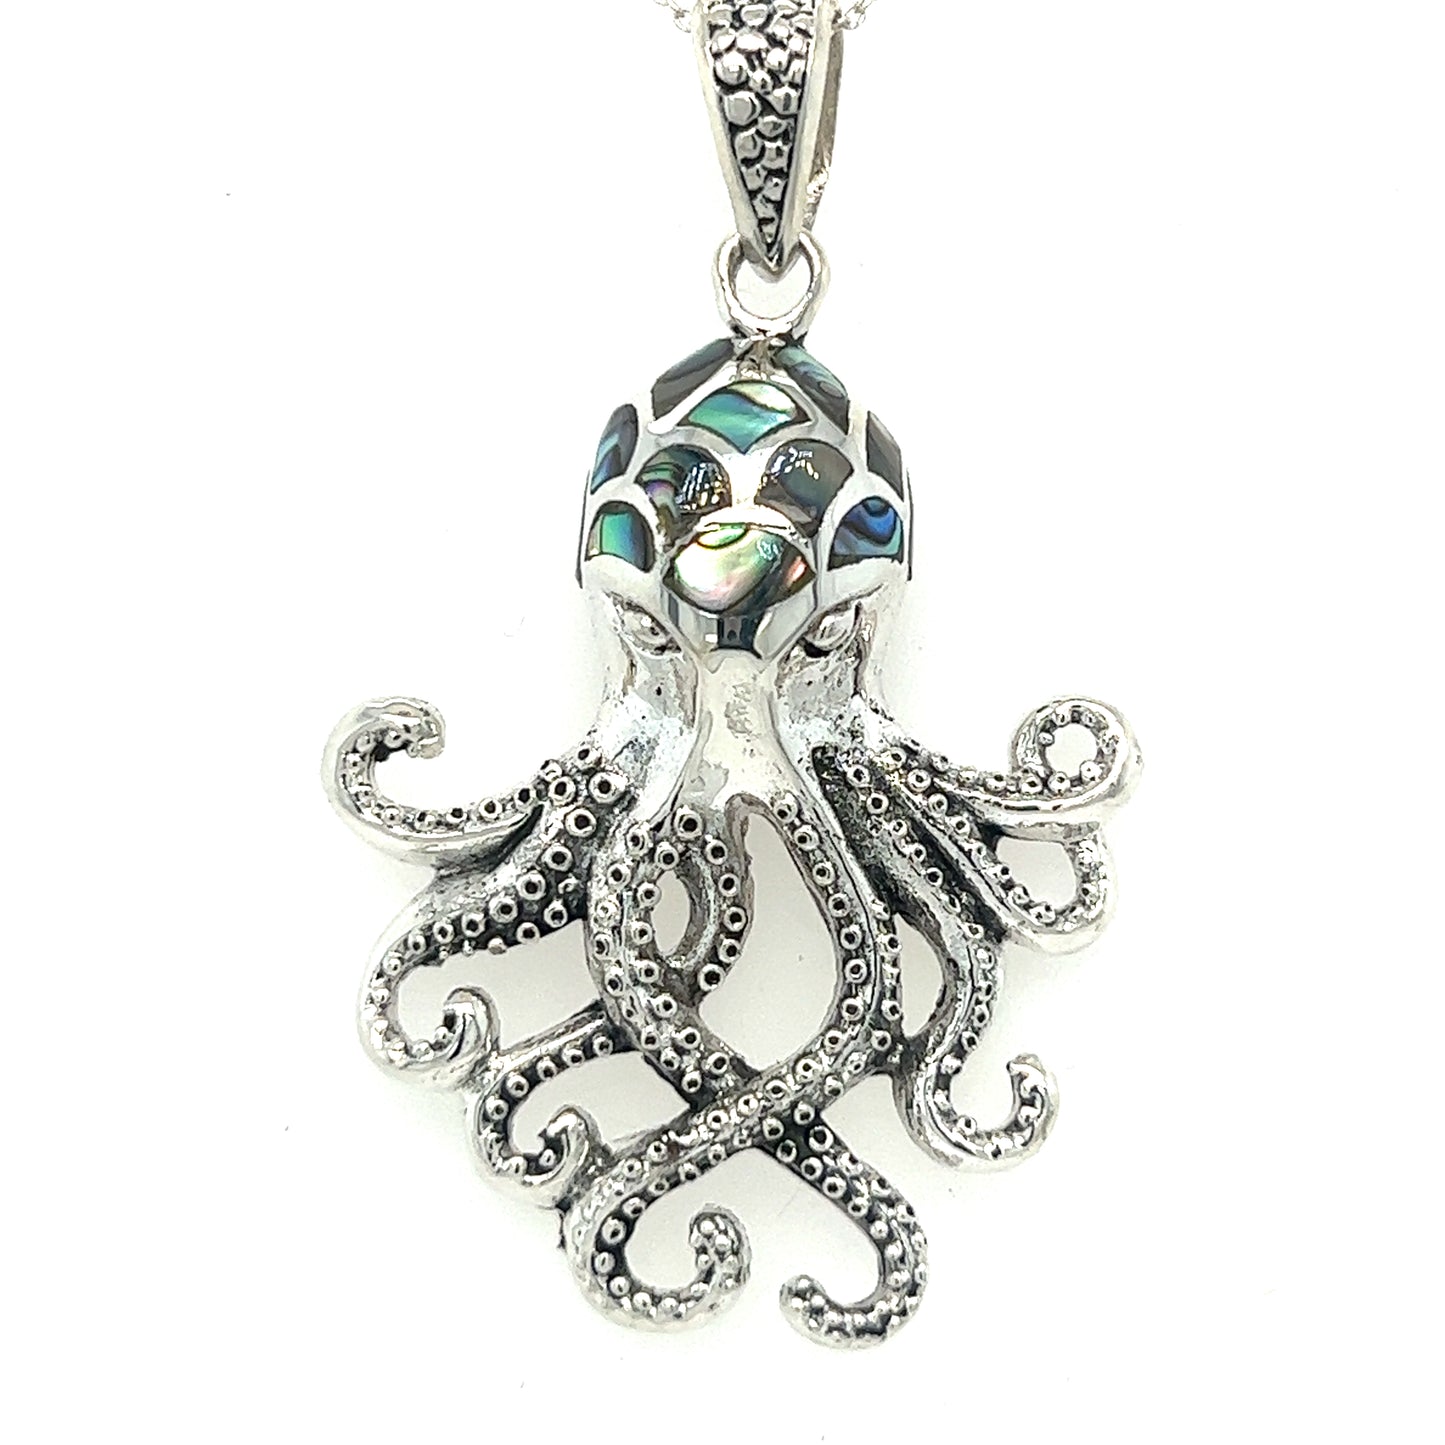 An intricately designed Super Silver Statement Octopus Pendant with Inlay Stones, adorned with inlay stone details, set against a pristine white background.